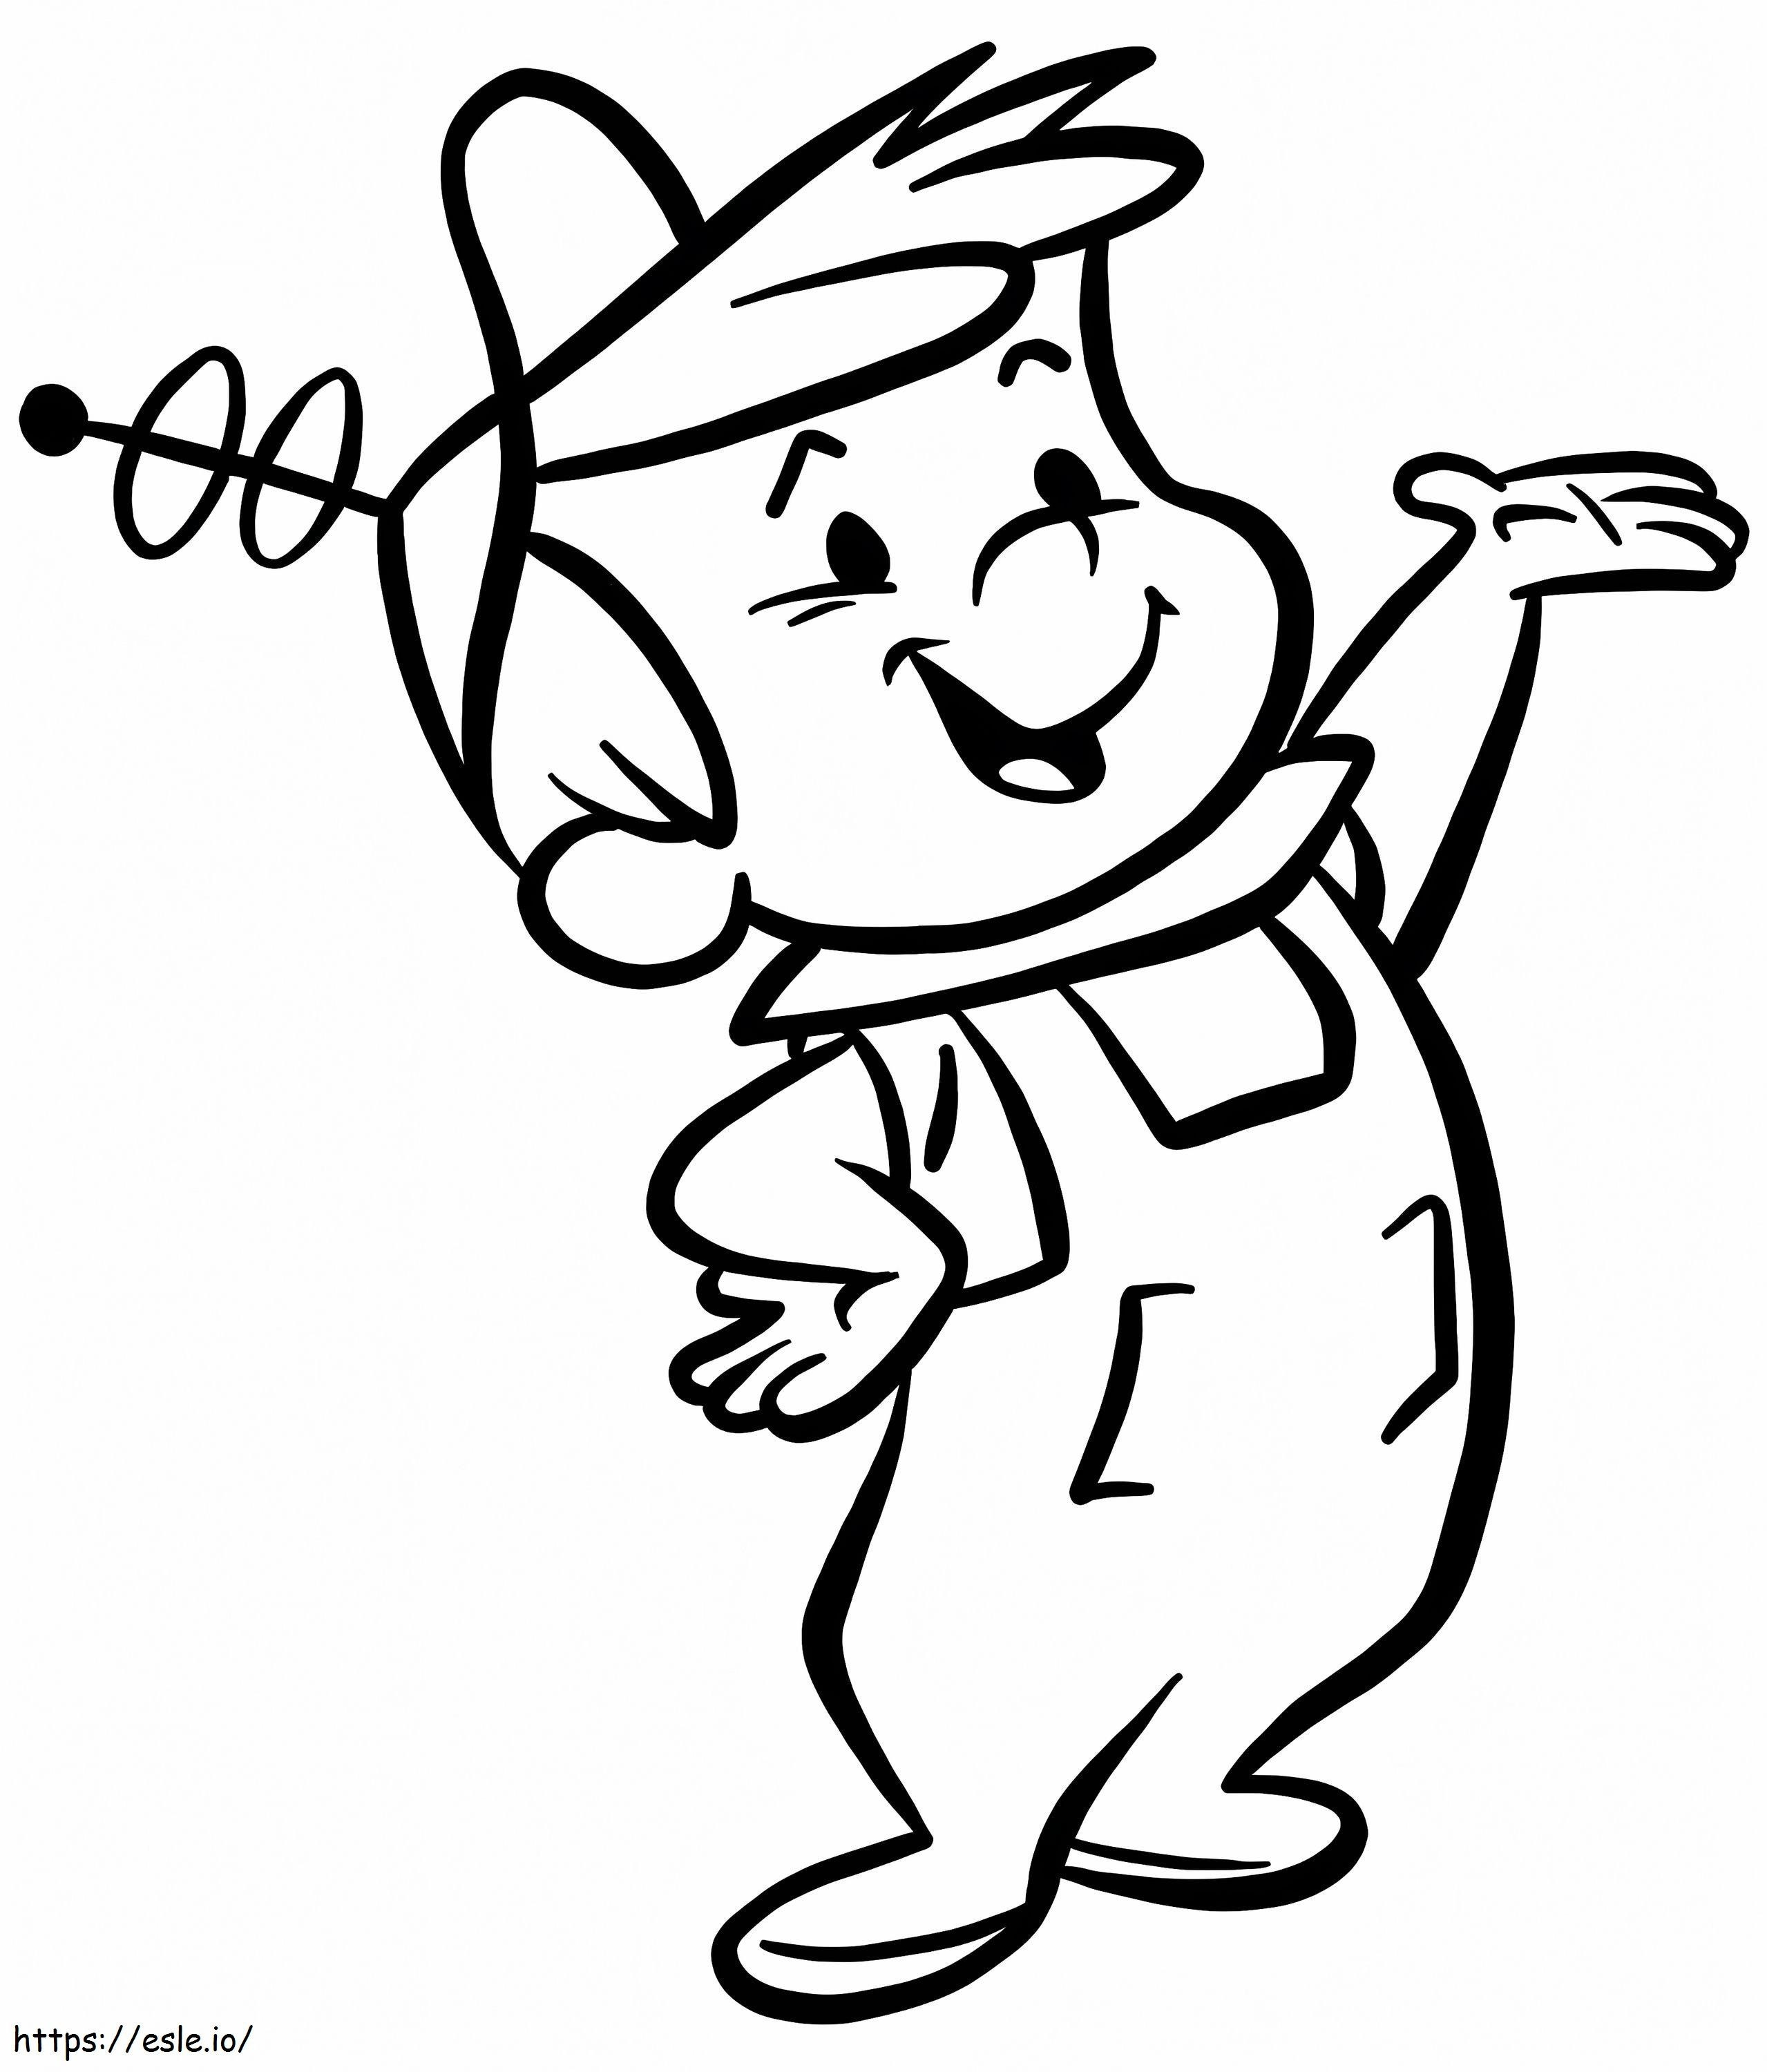 Elroy Jetson 1 coloring page